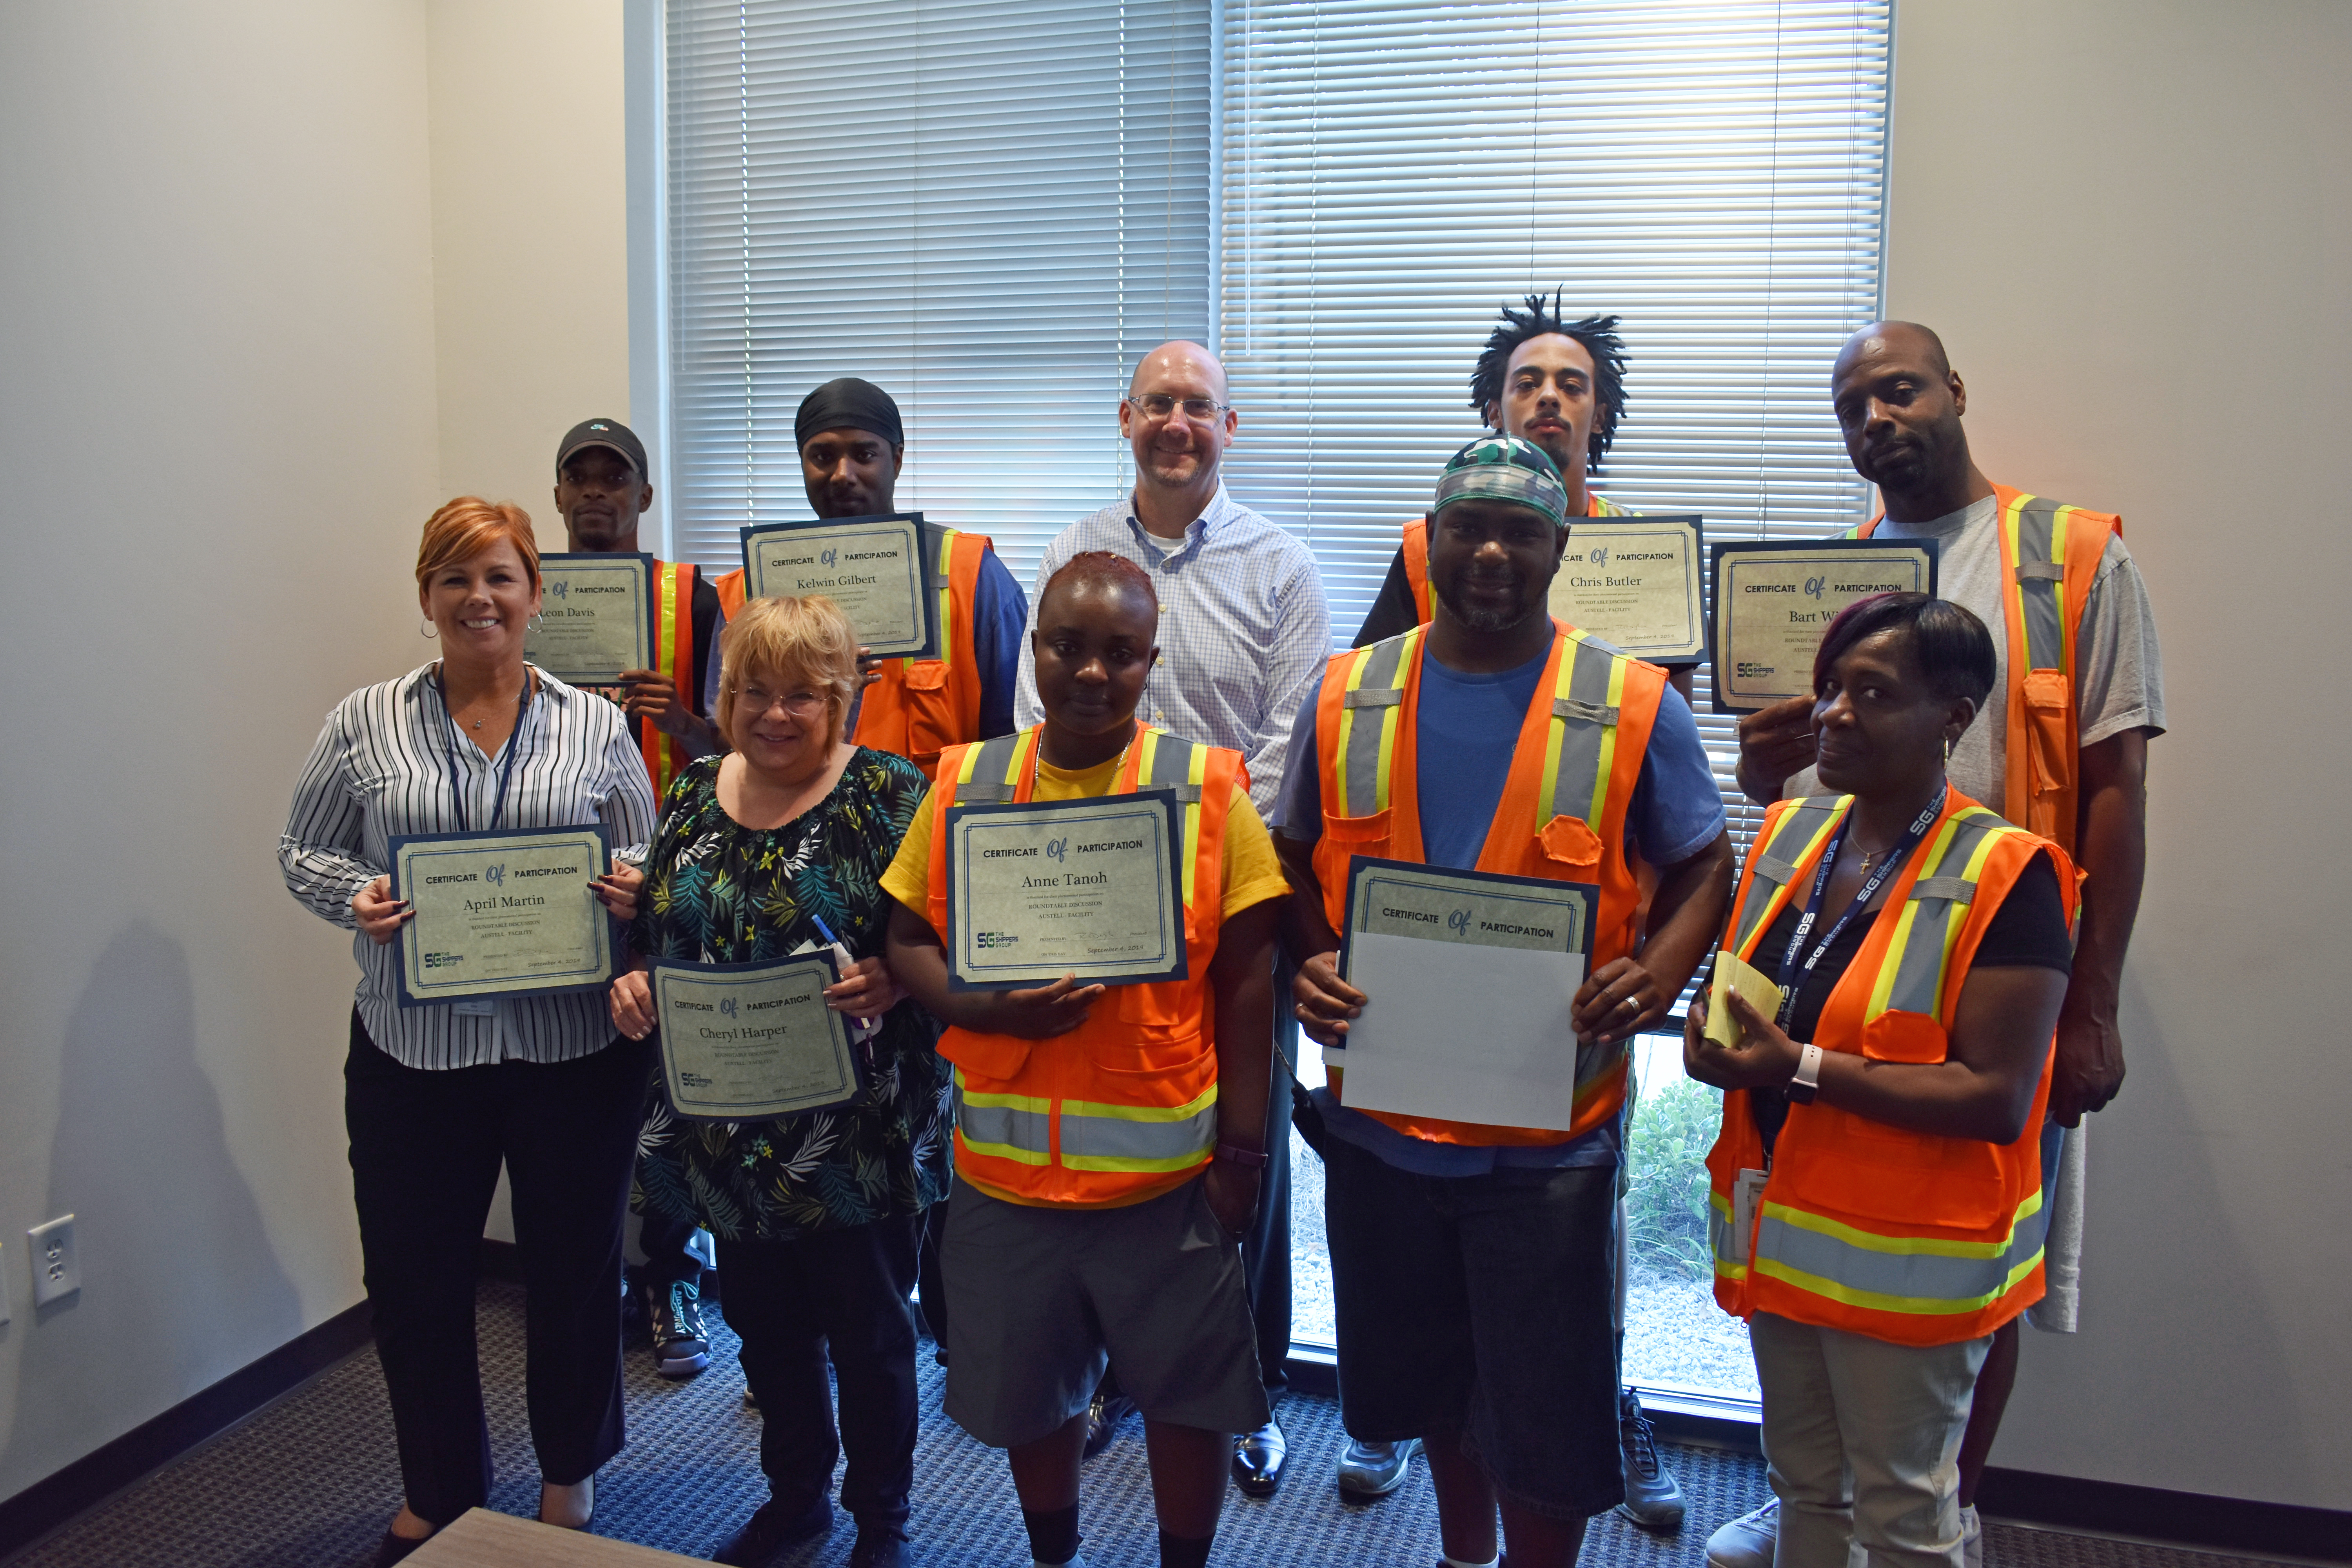 Austell Townhall August participants smiling for a group picture with their certificates of completion